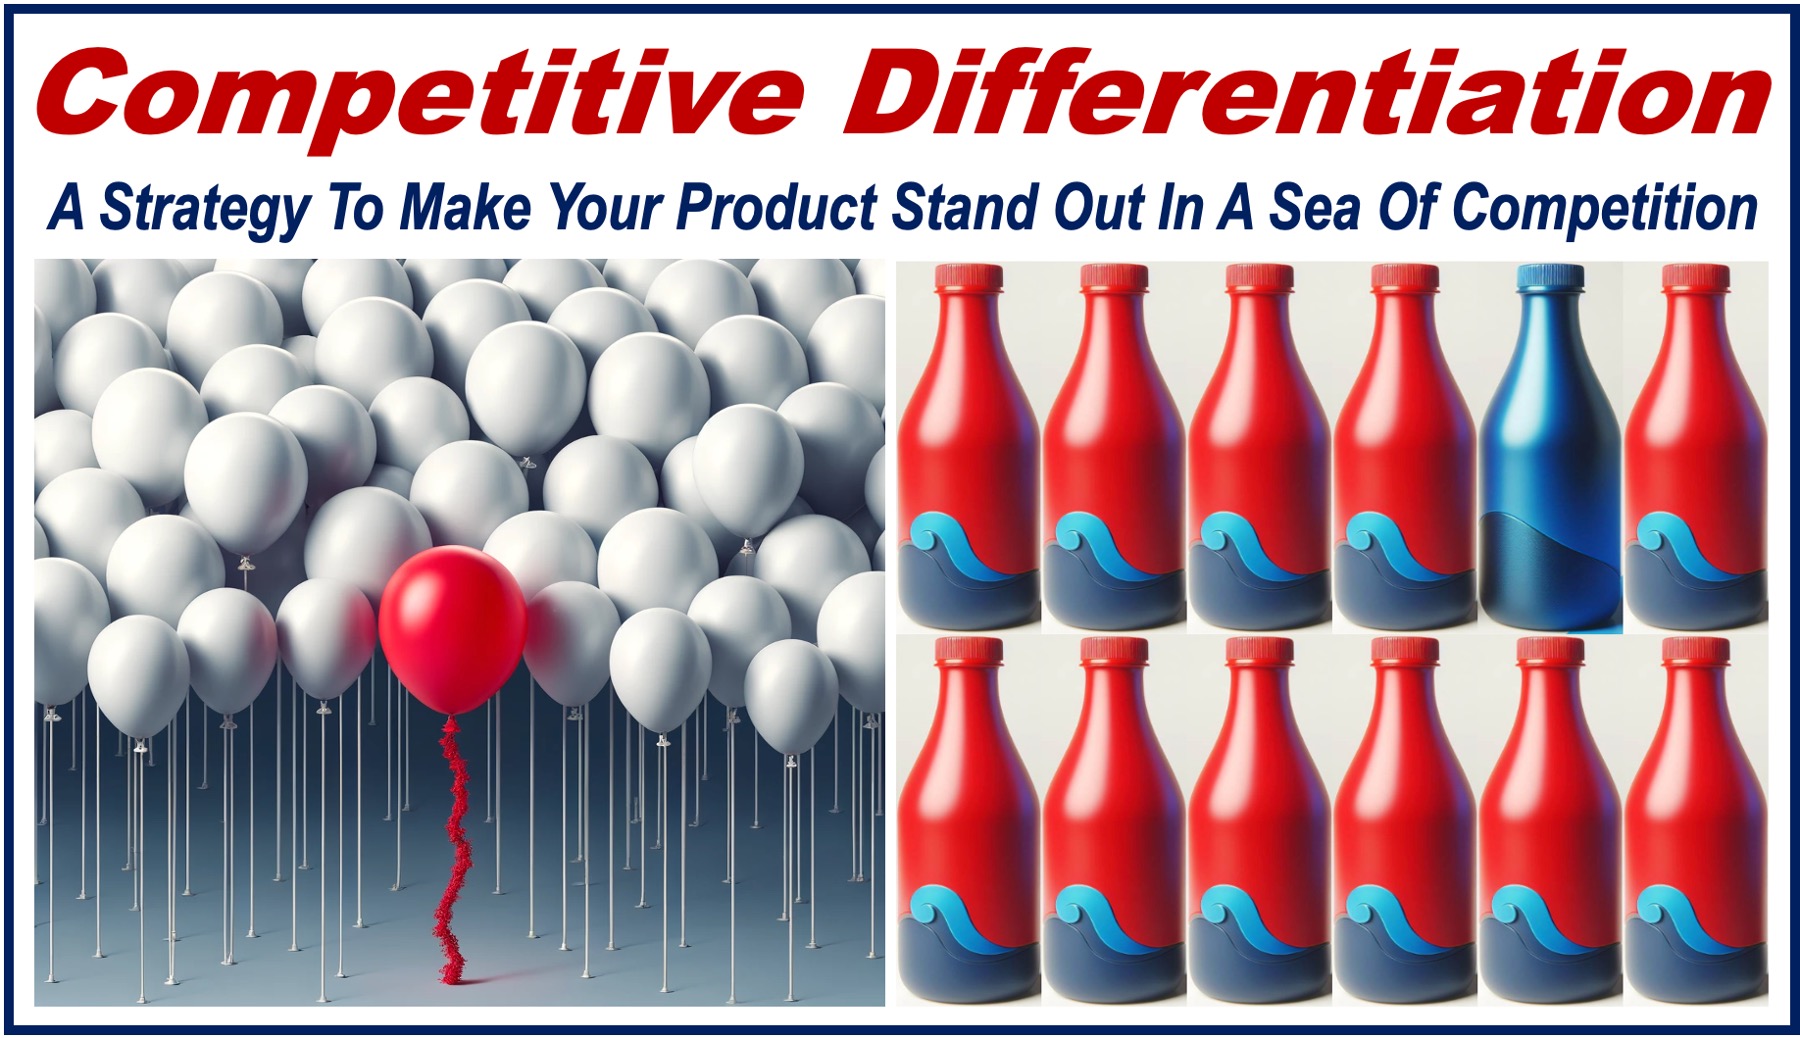 19 white balloons and one red, ten red bottles and one blue - plus the definition of COMPETITIVE DIFFERENTIATION